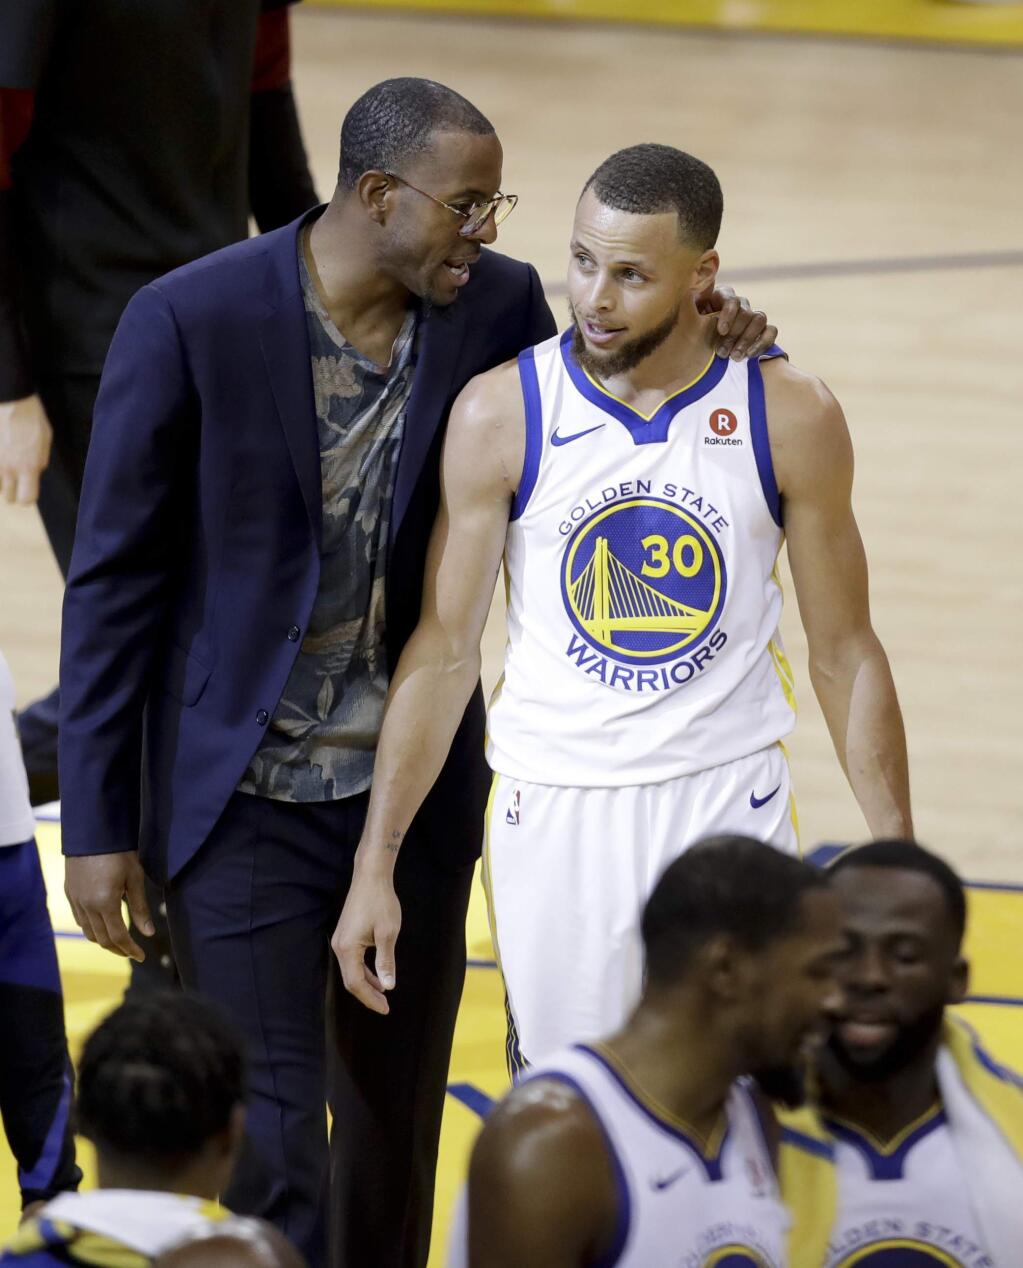 Golden State Warriors guard Stephen Curry (30) walks with injured forward Andre Iguodala, in suit, after scoring against the Cleveland Cavaliers during the first half of Game 1 of basketball's NBA Finals in Oakland, Calif., Thursday, May 31, 2018. (AP Photo/Marcio Jose Sanchez)